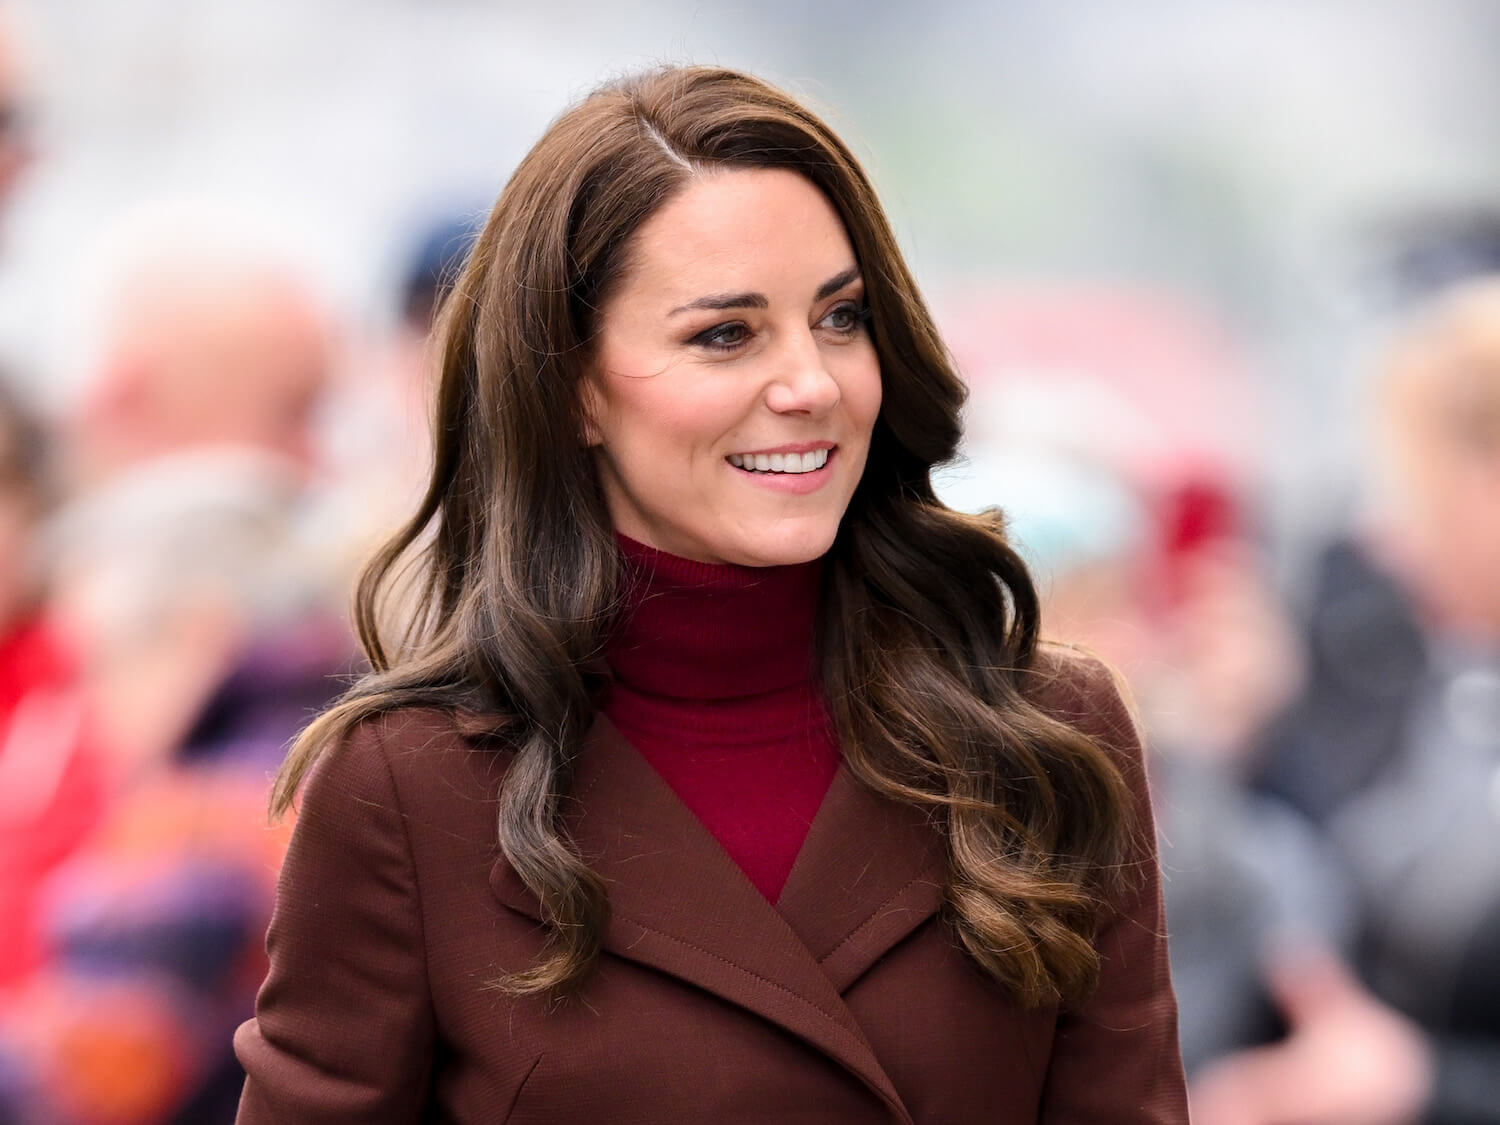 Kate Middleton mom confessions make her relatable